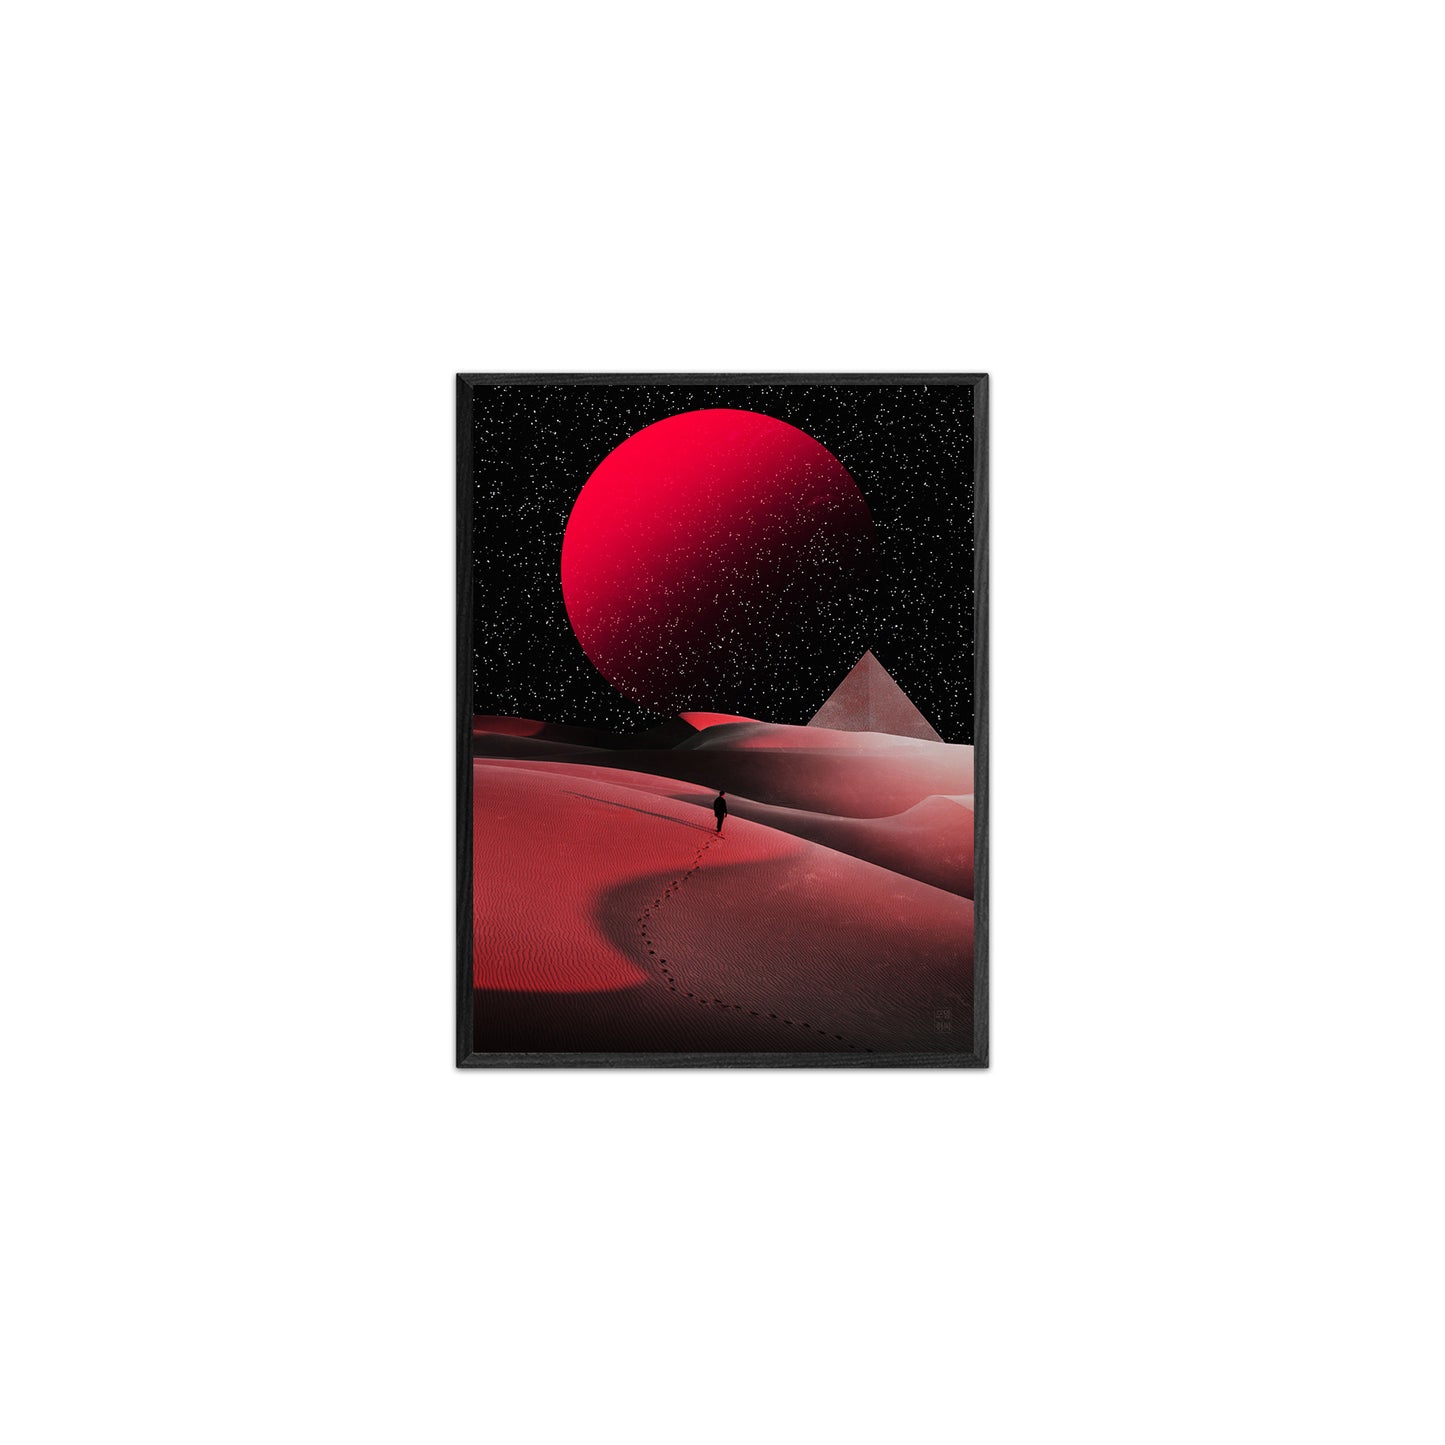 Red Planet Explore 8.5 X 11 Inch Print for Sci-Fi & Surreal Art Fans, great gift for home decor and room design